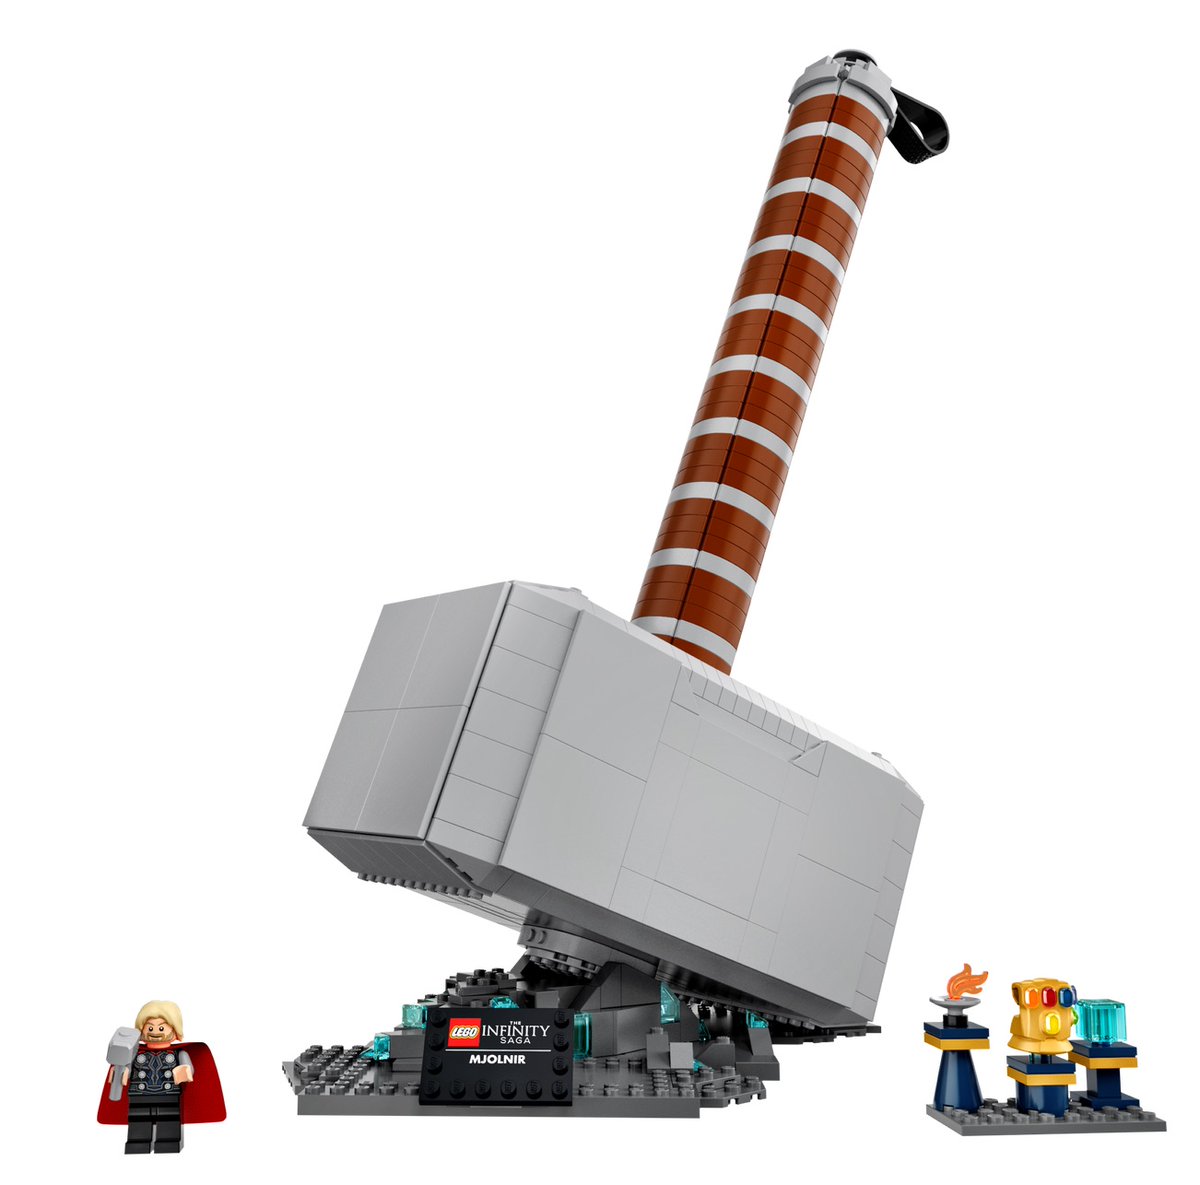 RT @Lbabinz: LEGO Marvel Thor's Hammer is available on the LEGO Store https://t.co/5IzLW0WFeT #ad https://t.co/ykGvBNR8Ml